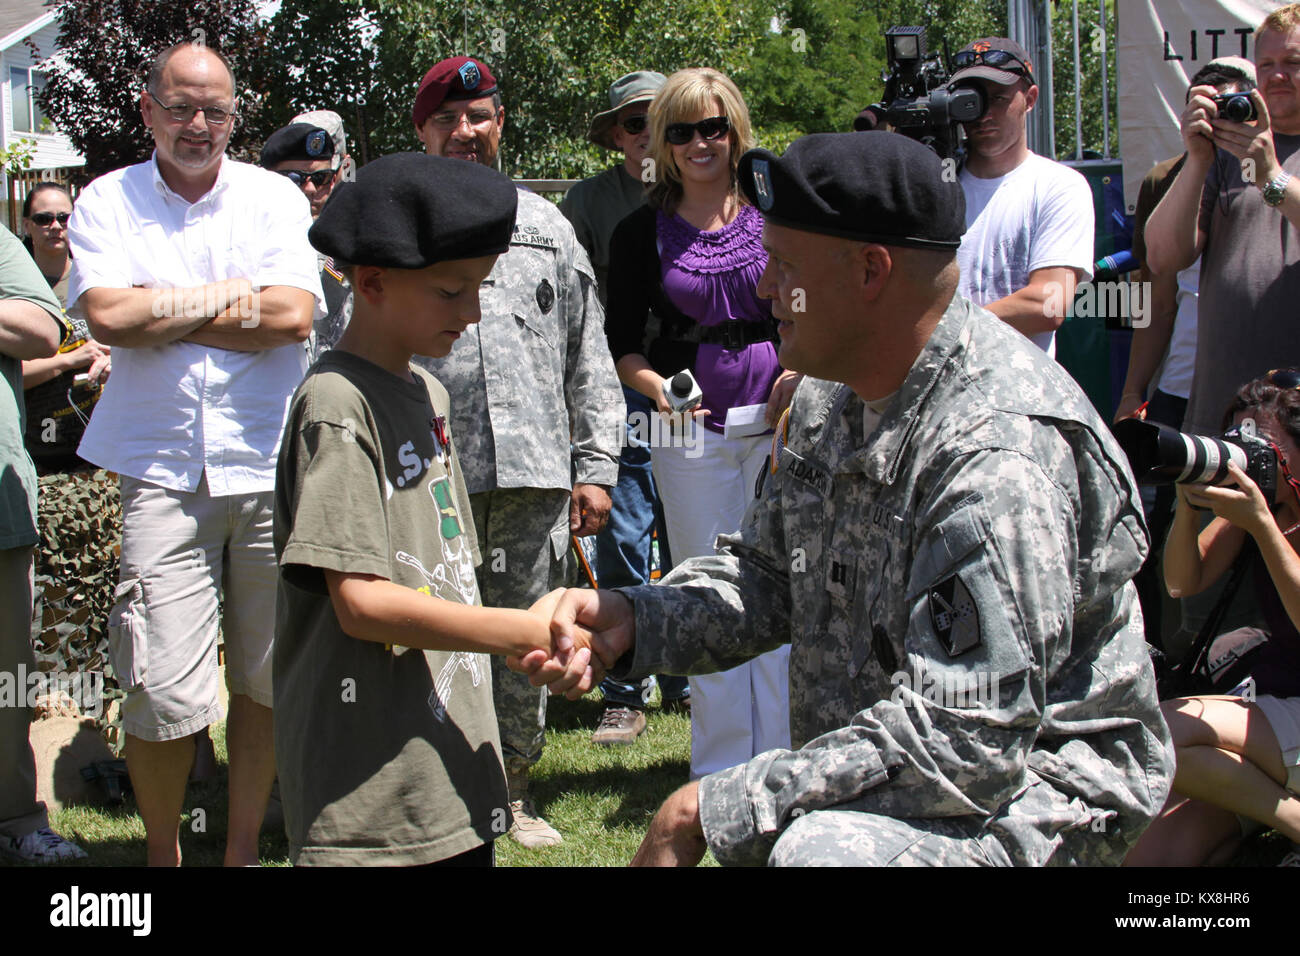 Draper, Utah - The Utah National Guard along with countless family, friends and volunteers from the Make-a-Wish Foundation fulfilled 7-year-old Mark Jeanes wish of becoming a Soldier by making him an honorary airborne paratrooper at his home July 30.  Mark, who suffers from a rare life-threatening illness, was surprised at his home by family, friends, and both current and former Servicemembers spanning all branches of service.  Volunteers turned his backyard into an Army themed playground, with the highlight being a restored WWII era jeep.  The event was a surprise by the Make-a-Wish Foundatio Stock Photo